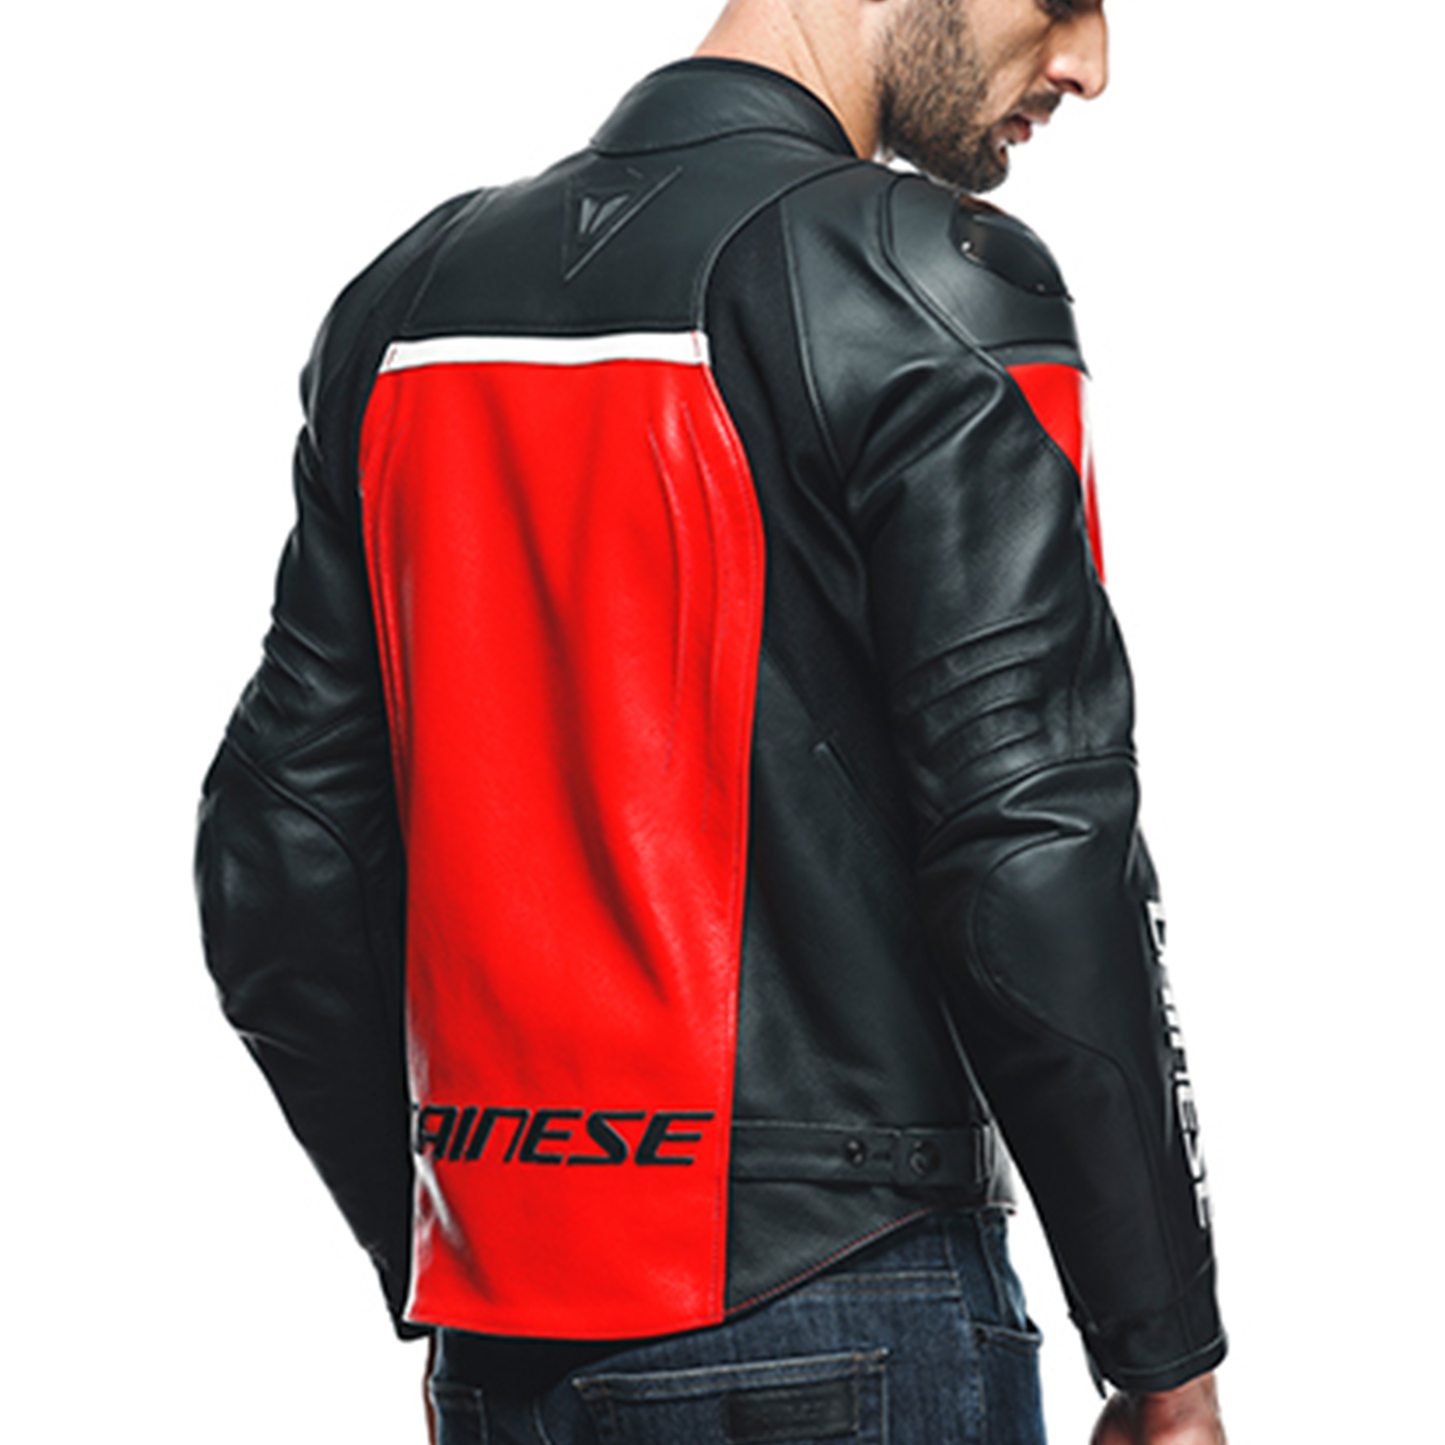 Dainese Racing 4 Leather Jacket - Lava Red/Black